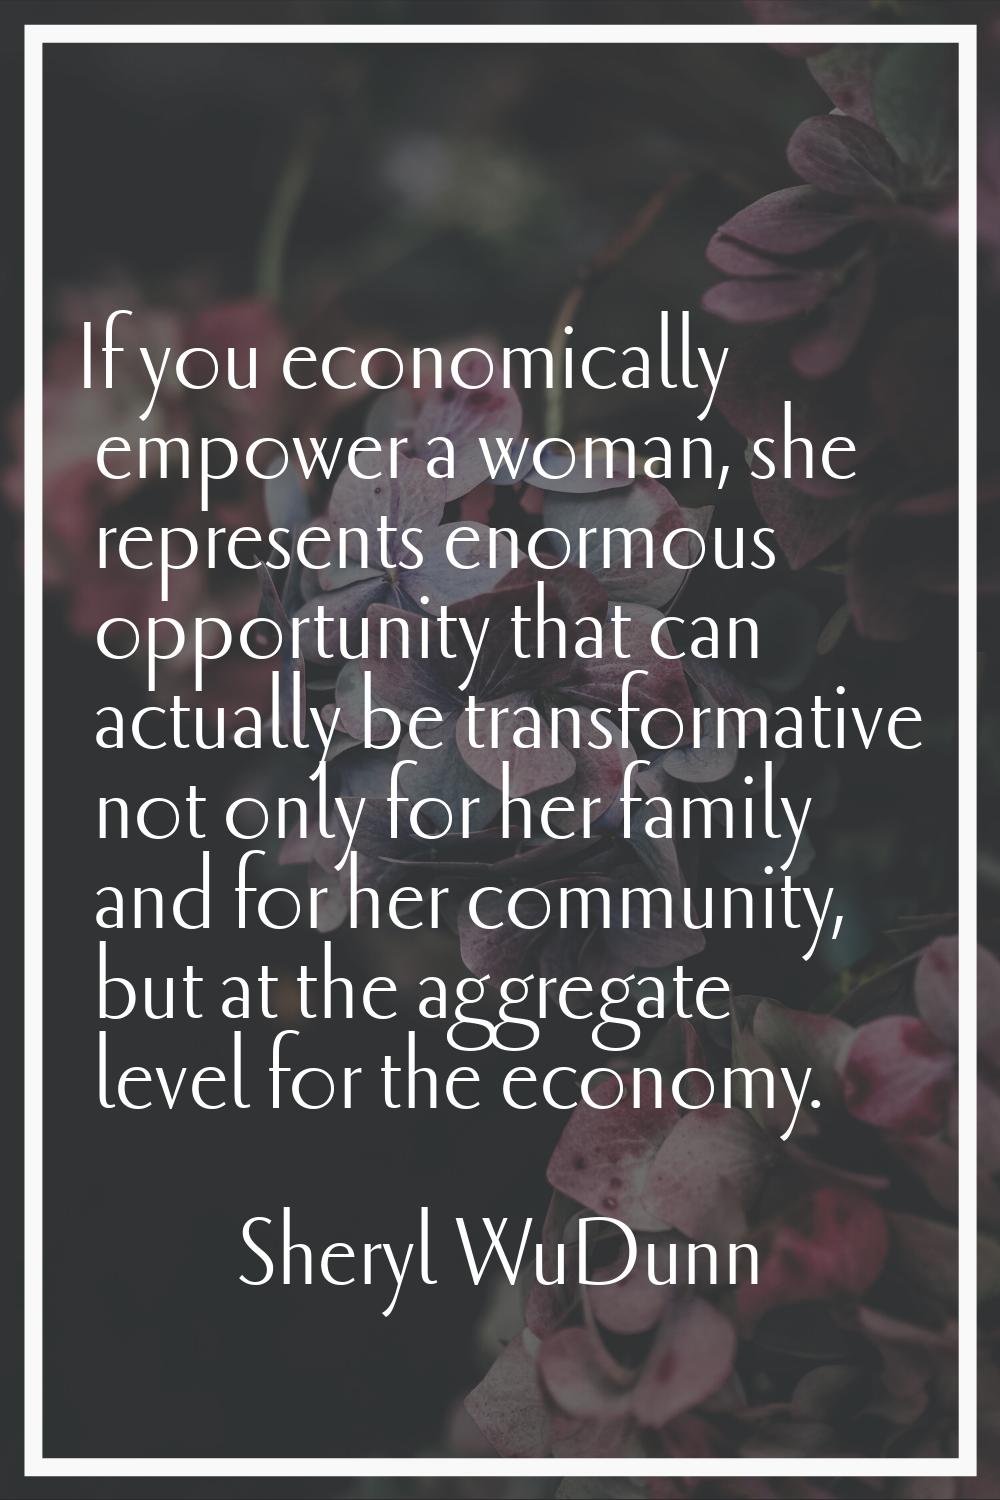 If you economically empower a woman, she represents enormous opportunity that can actually be trans